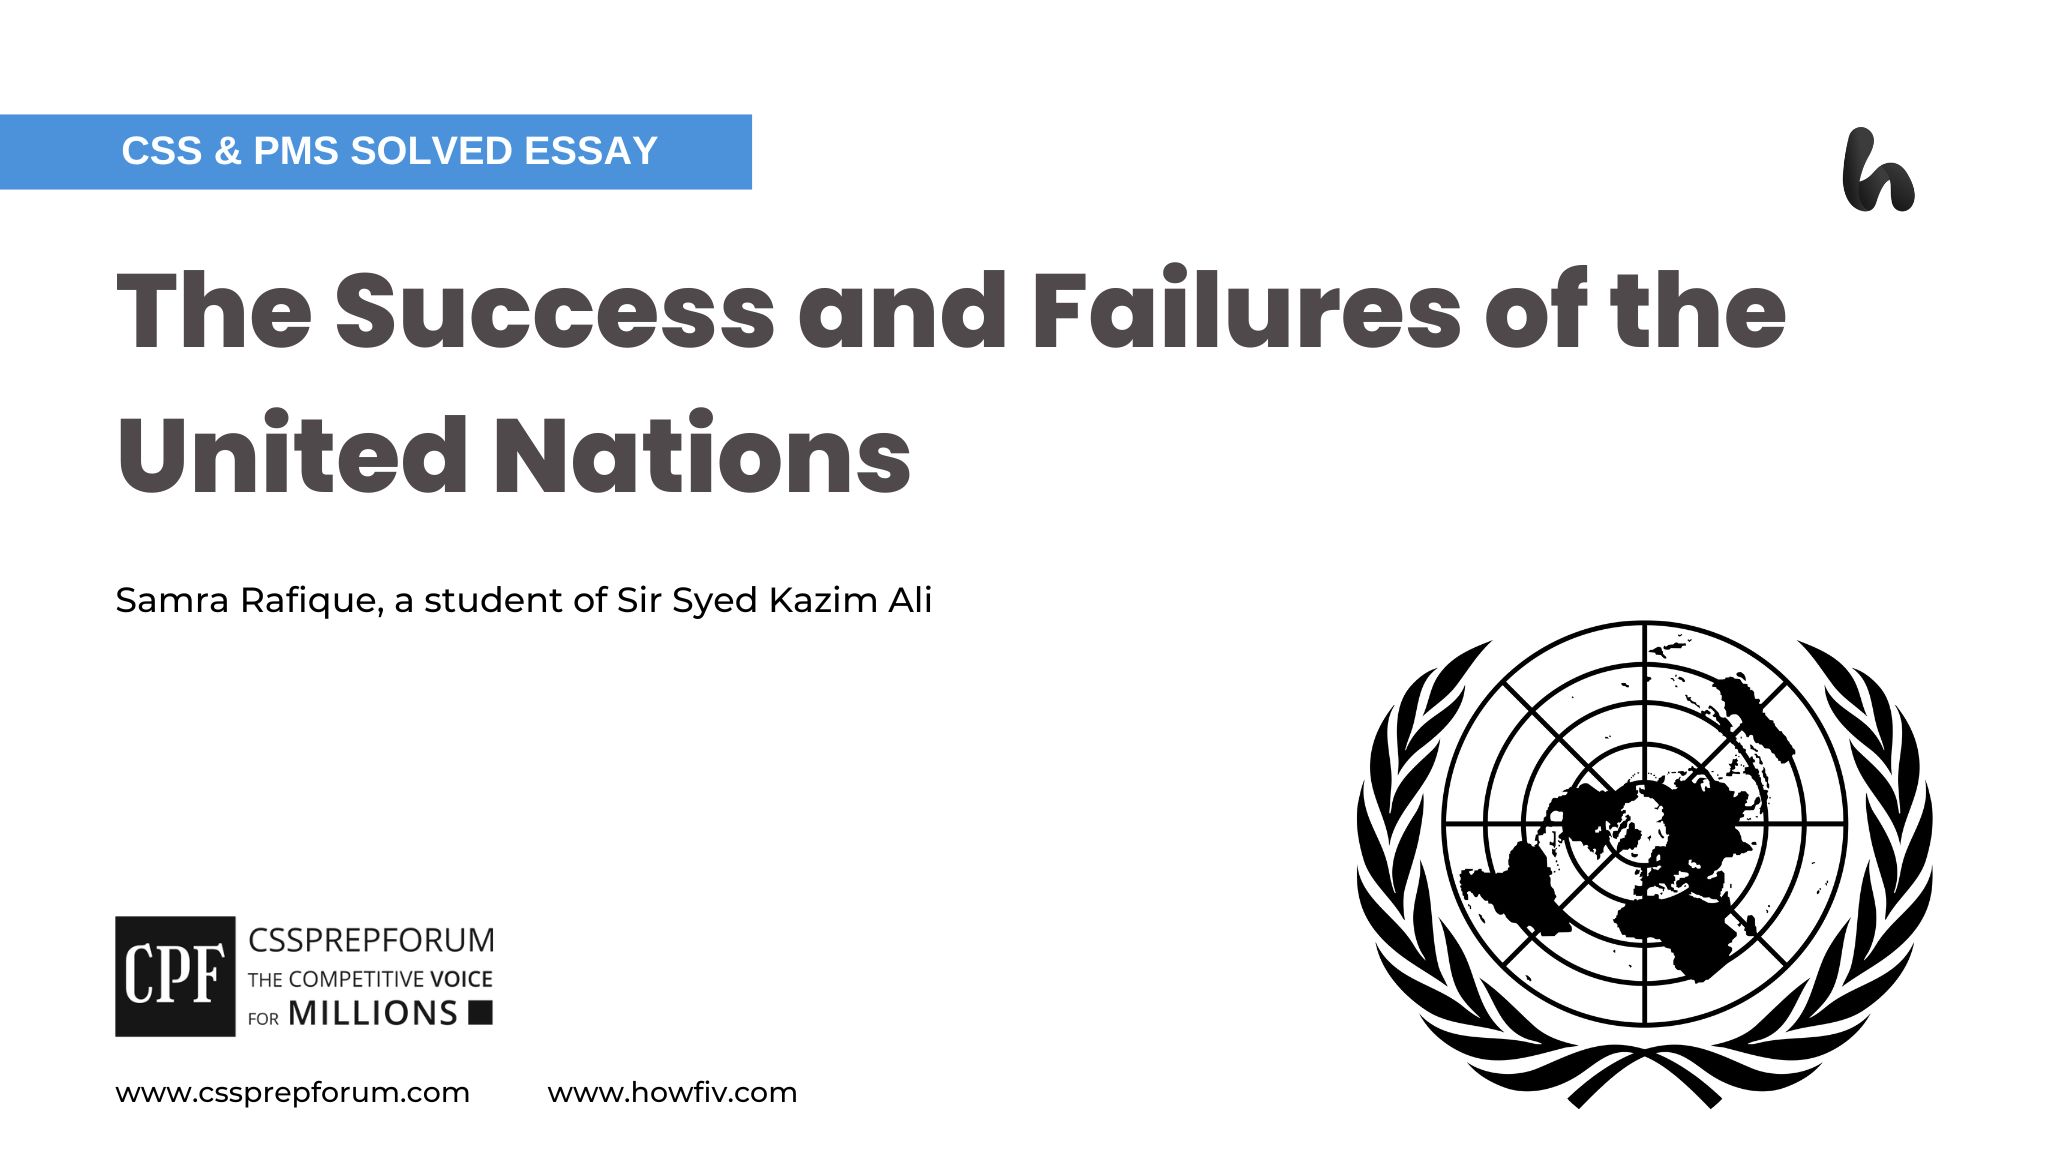 The Success and Failures of the United Nations by Samra Rafique